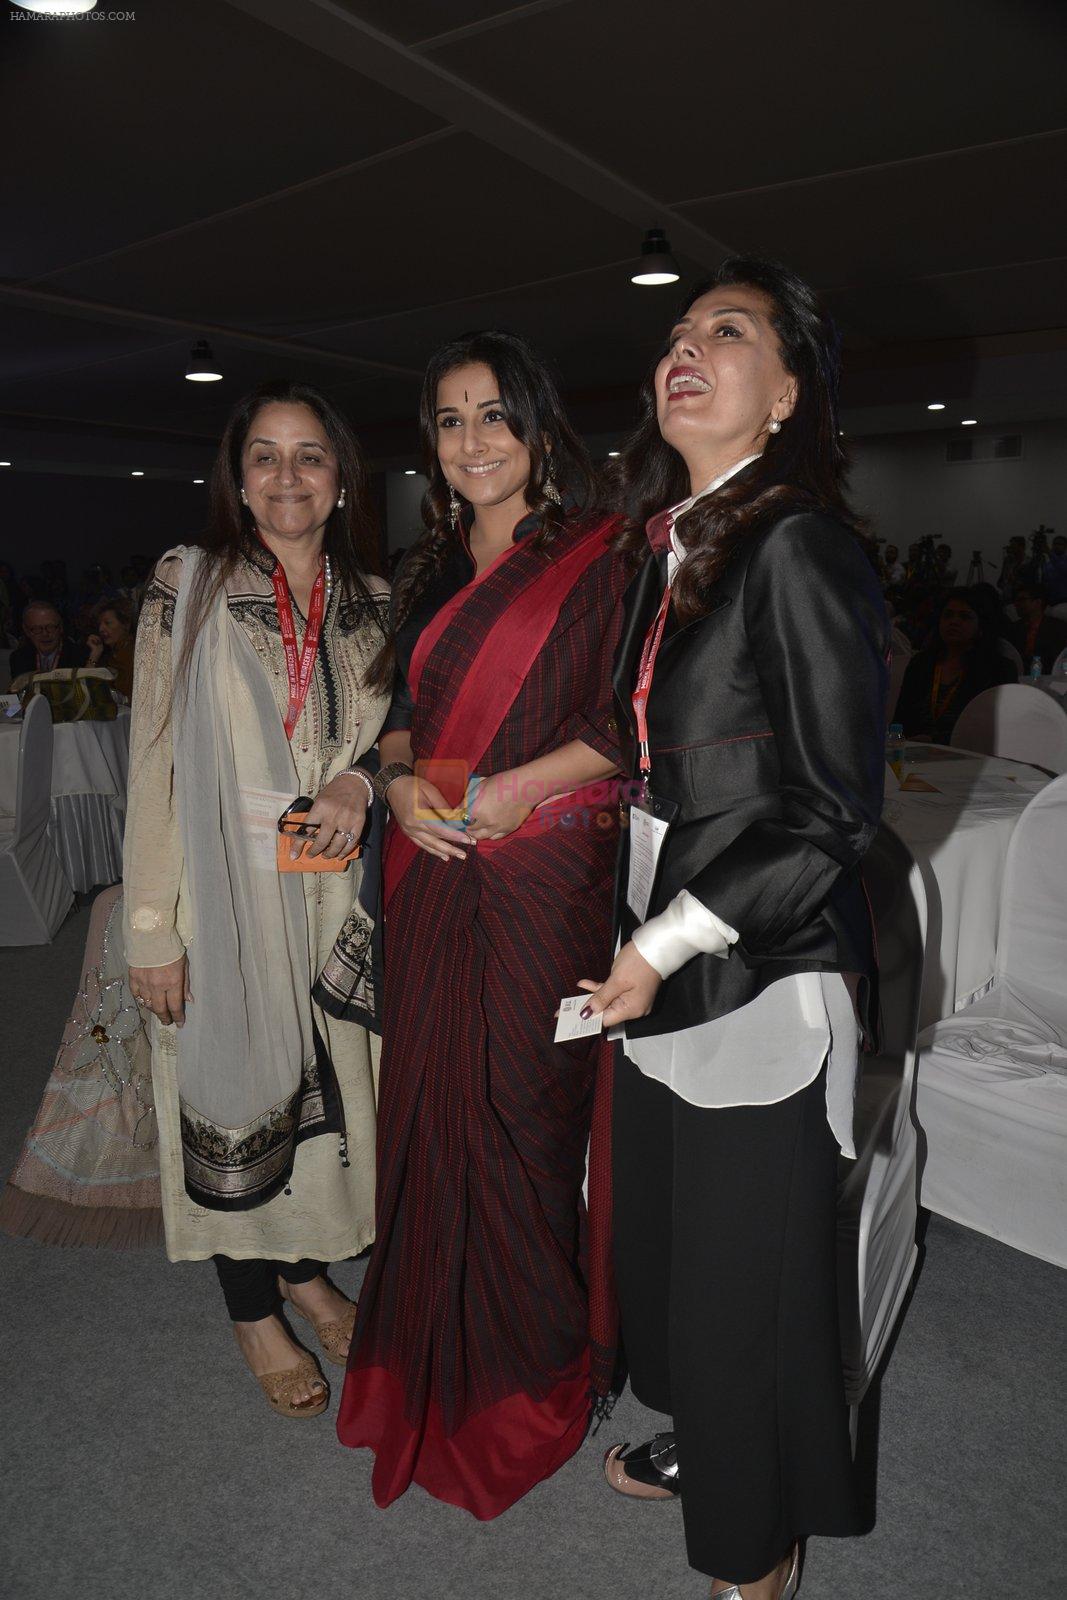 Vidya Balan as a speaker on discussion on Sarees at make in India on 15th Feb 2016